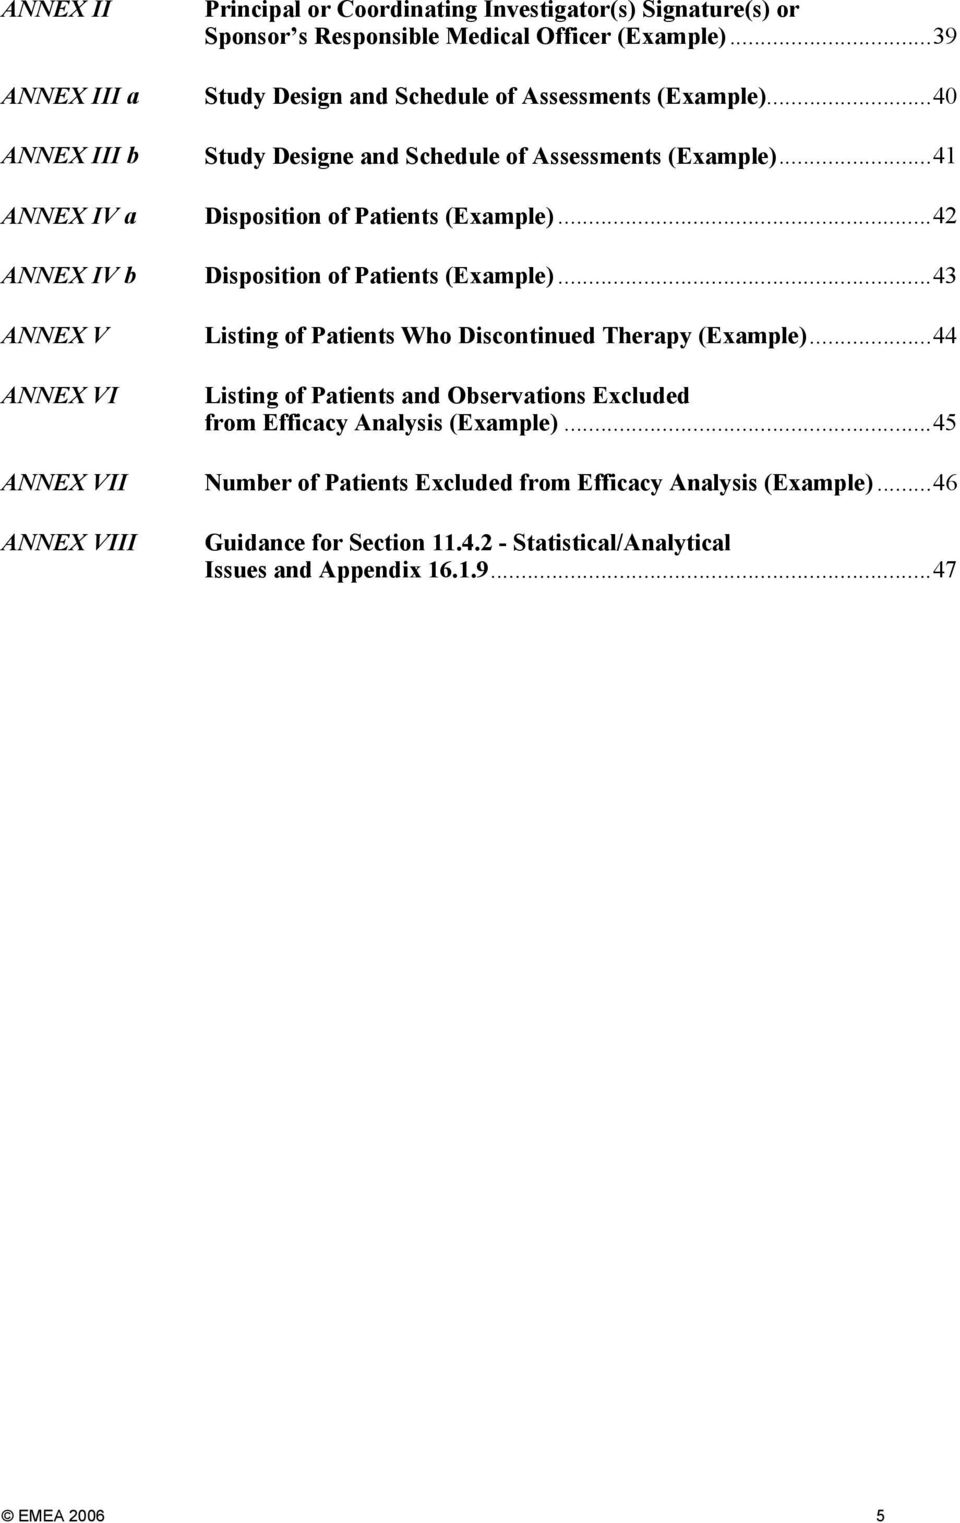 ..42 ANNEX IV b Disposition of Patients (Example)...43 ANNEX V ANNEX VI Listing of Patients Who Discontinued Therapy (Example).